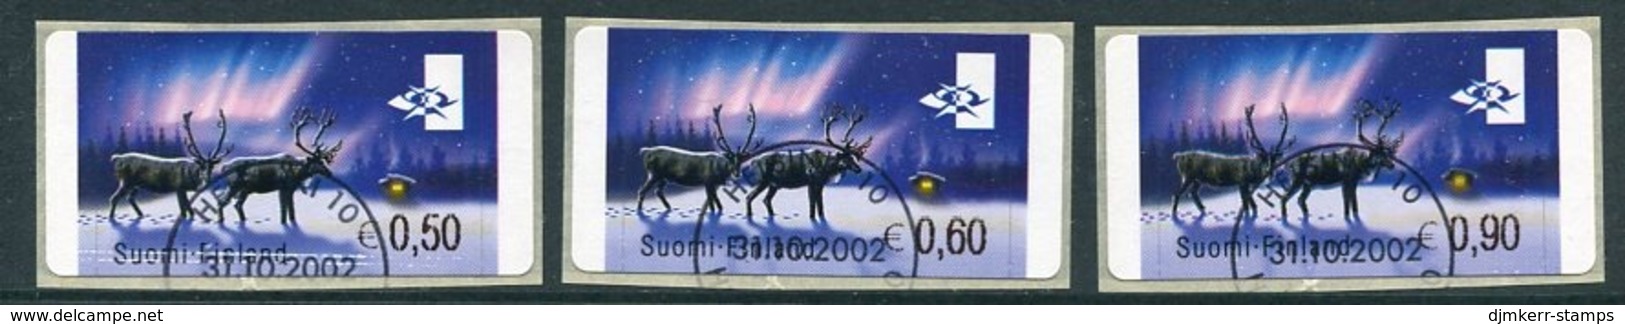 FINLAND 2002 Reindeer ATM, Three Values Used.  Michel 37 - Timbres De Distributeurs [ATM]